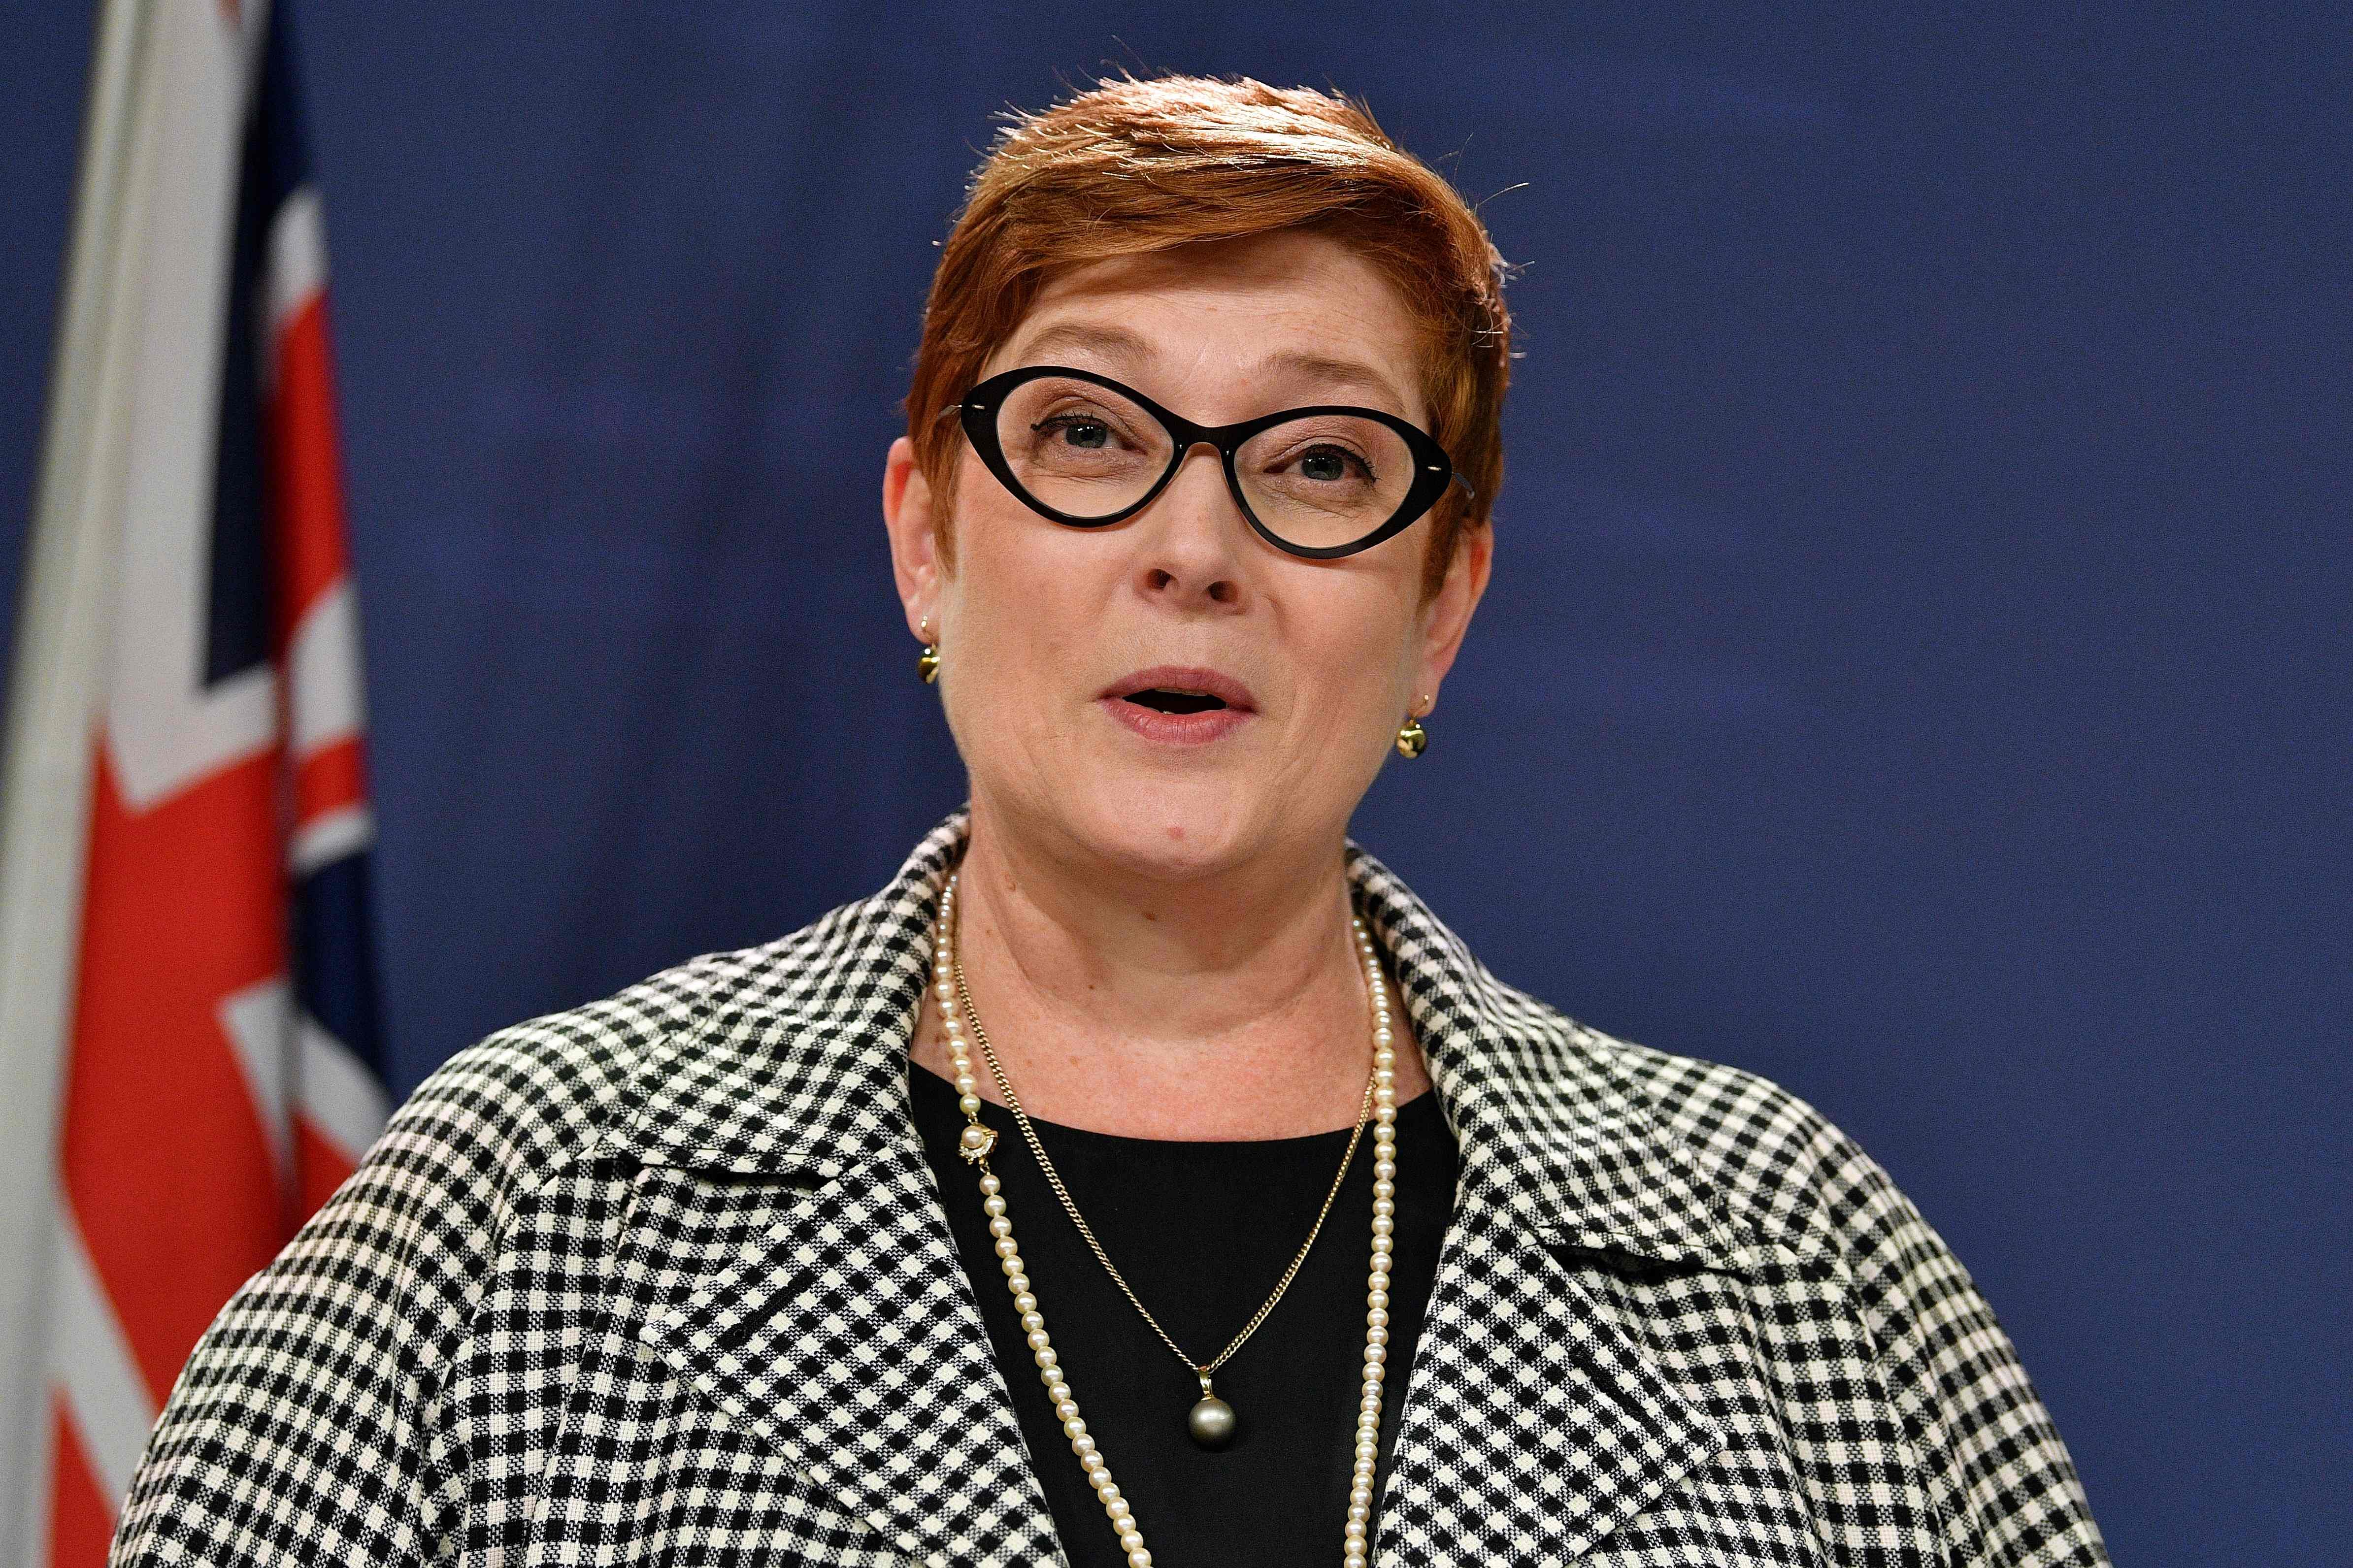 Australia's foreign minister Marise Payne attends joint press conference with New Zealand counterpart Winston Peters in Sydney. (AFP Photo)